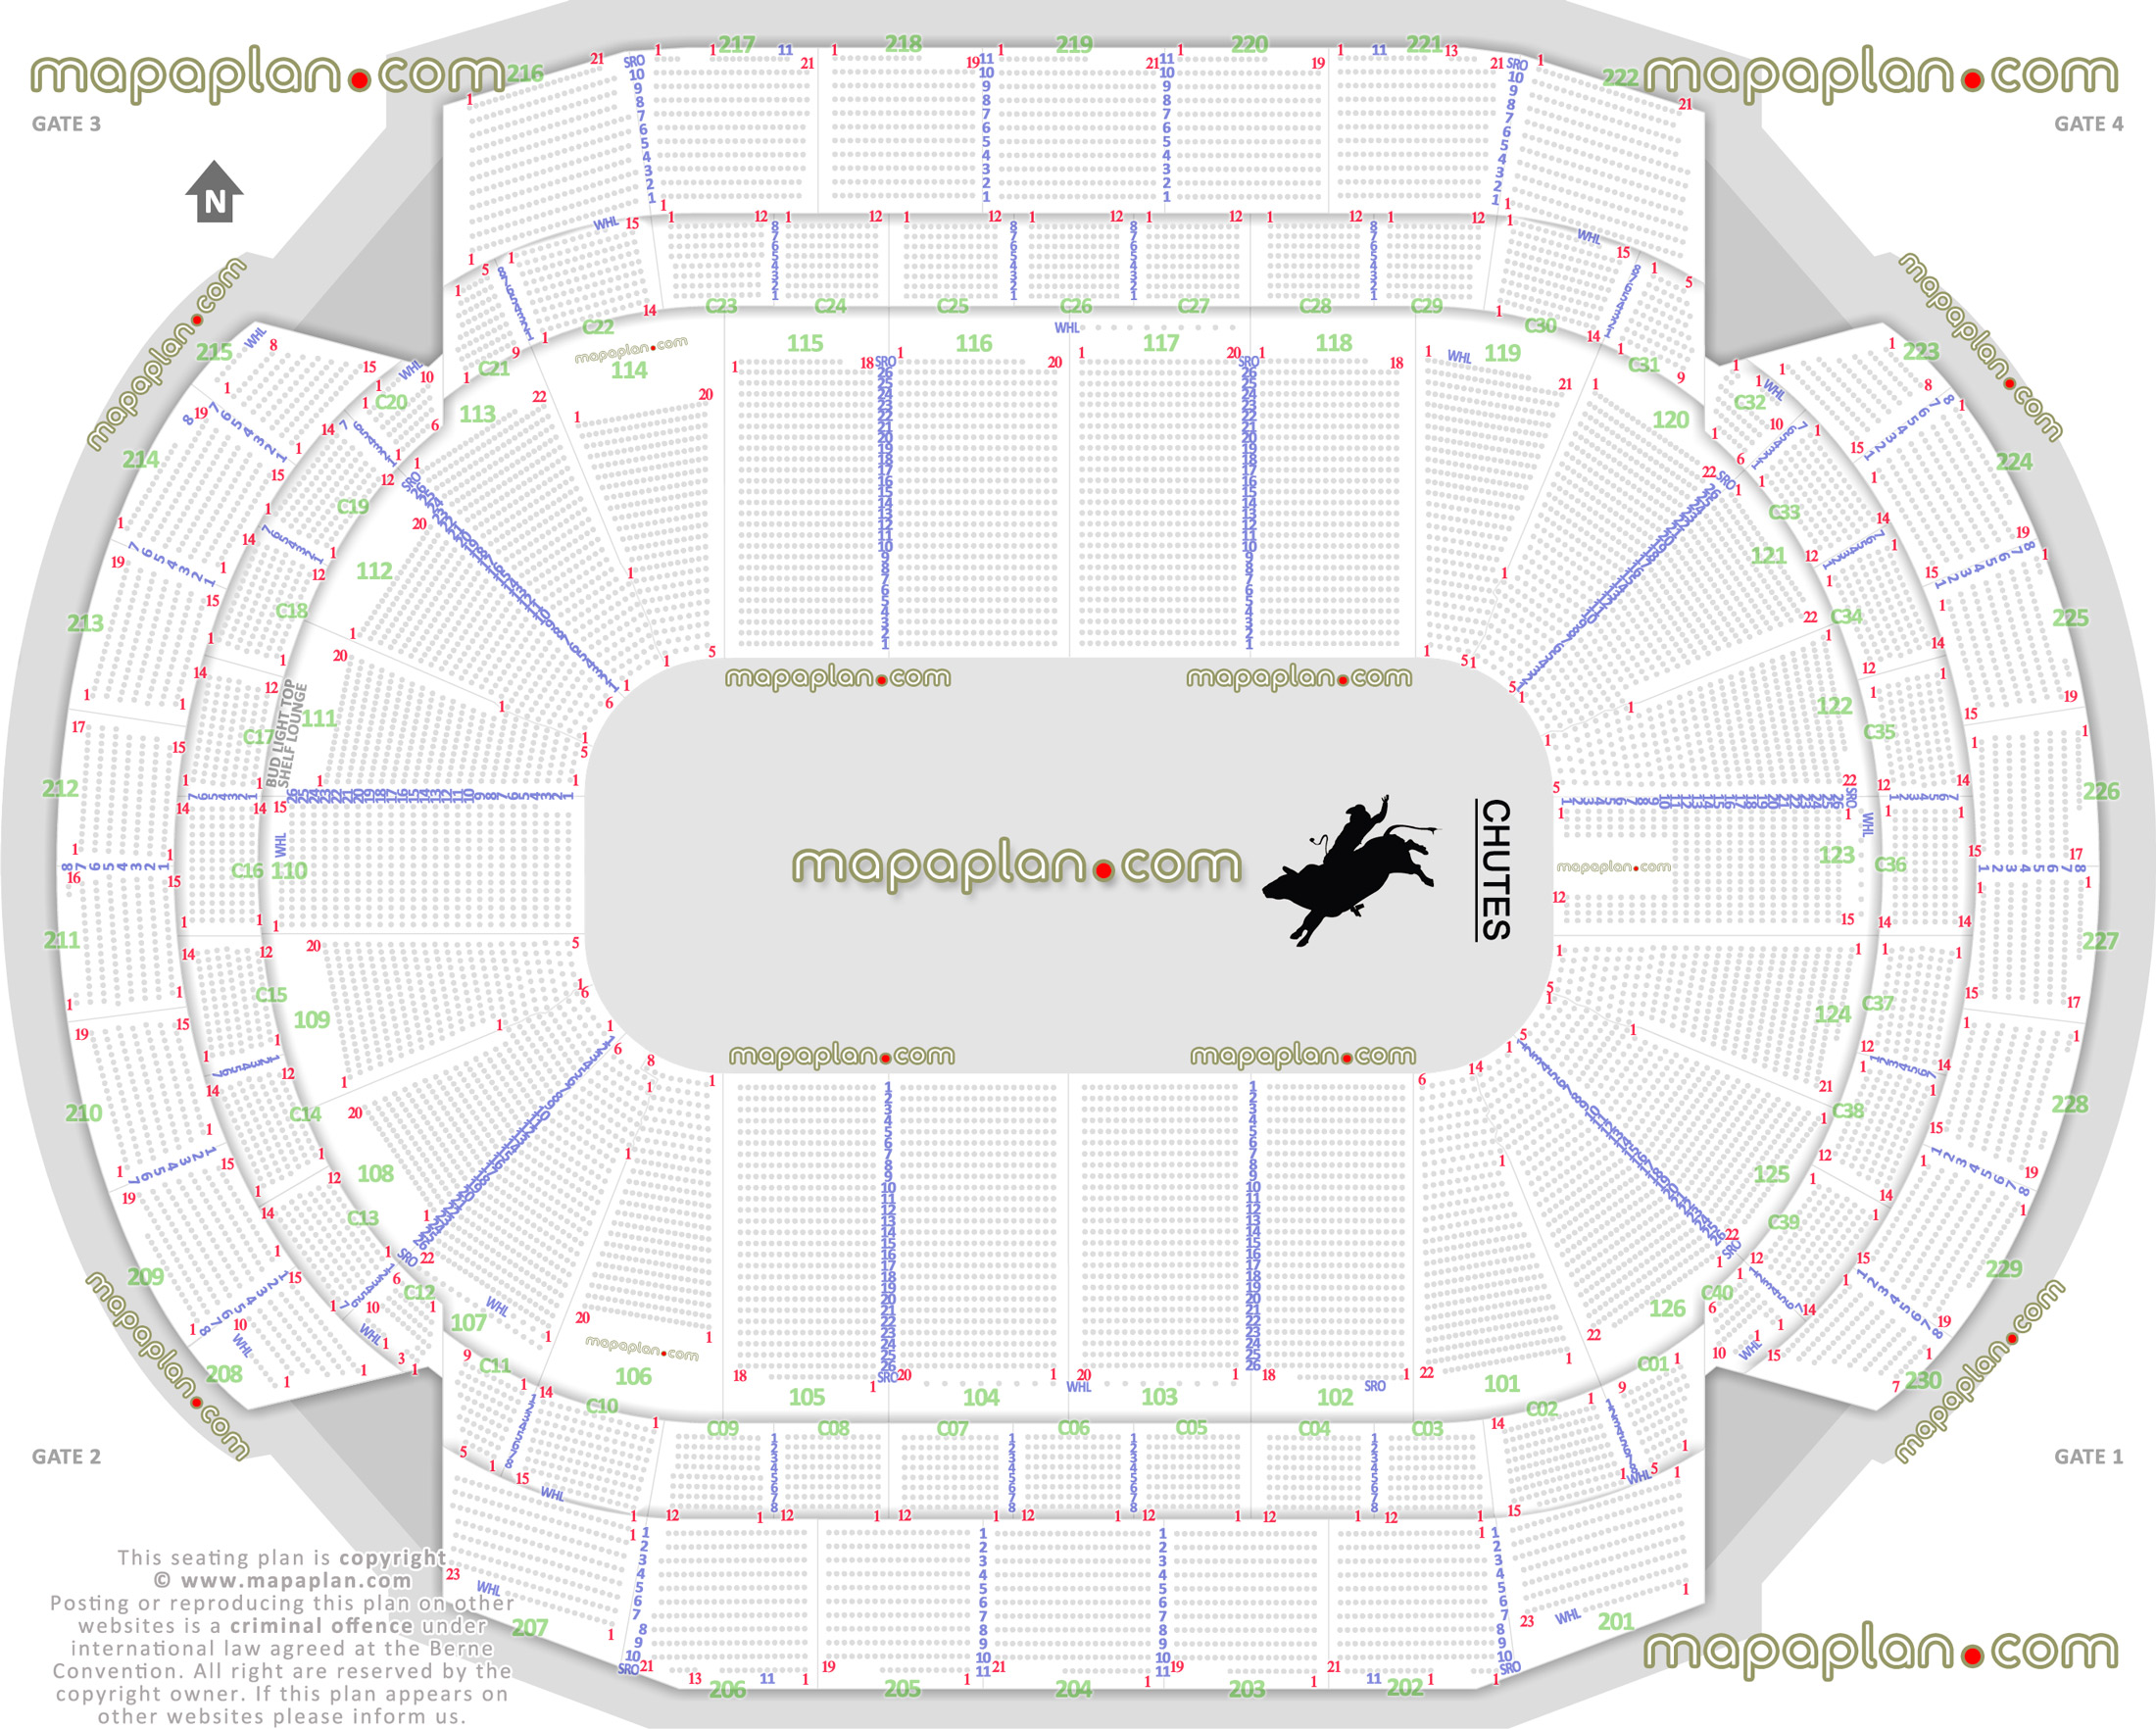 pbr professional bull riders rodeo minnesota usa detailed seating capacity 3d arrangement arena row numbers layout lower club upper level main entrance gate exits map west east south north detailed fully seated chart setup standing room only sro areas wheelchair whl disabled handicap accessible seats plan Saint Paul Xcel Energy Center seating chart